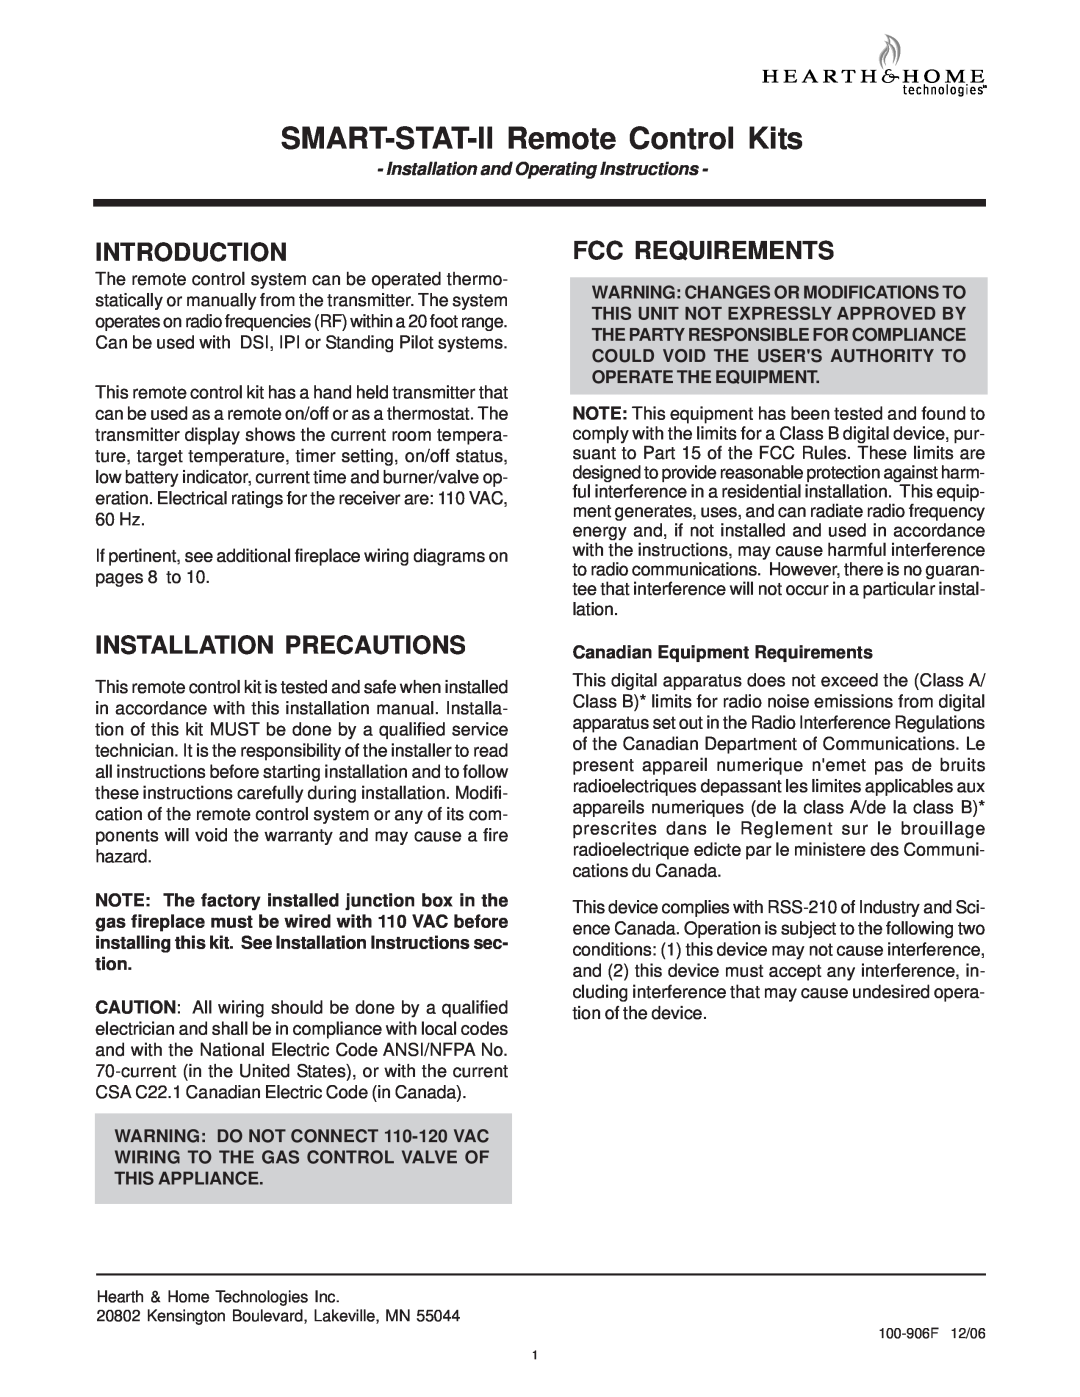 Hearth and Home Technologies SMART-STAT-II operating instructions Introduction, Fcc Requirements, Installation Precautions 